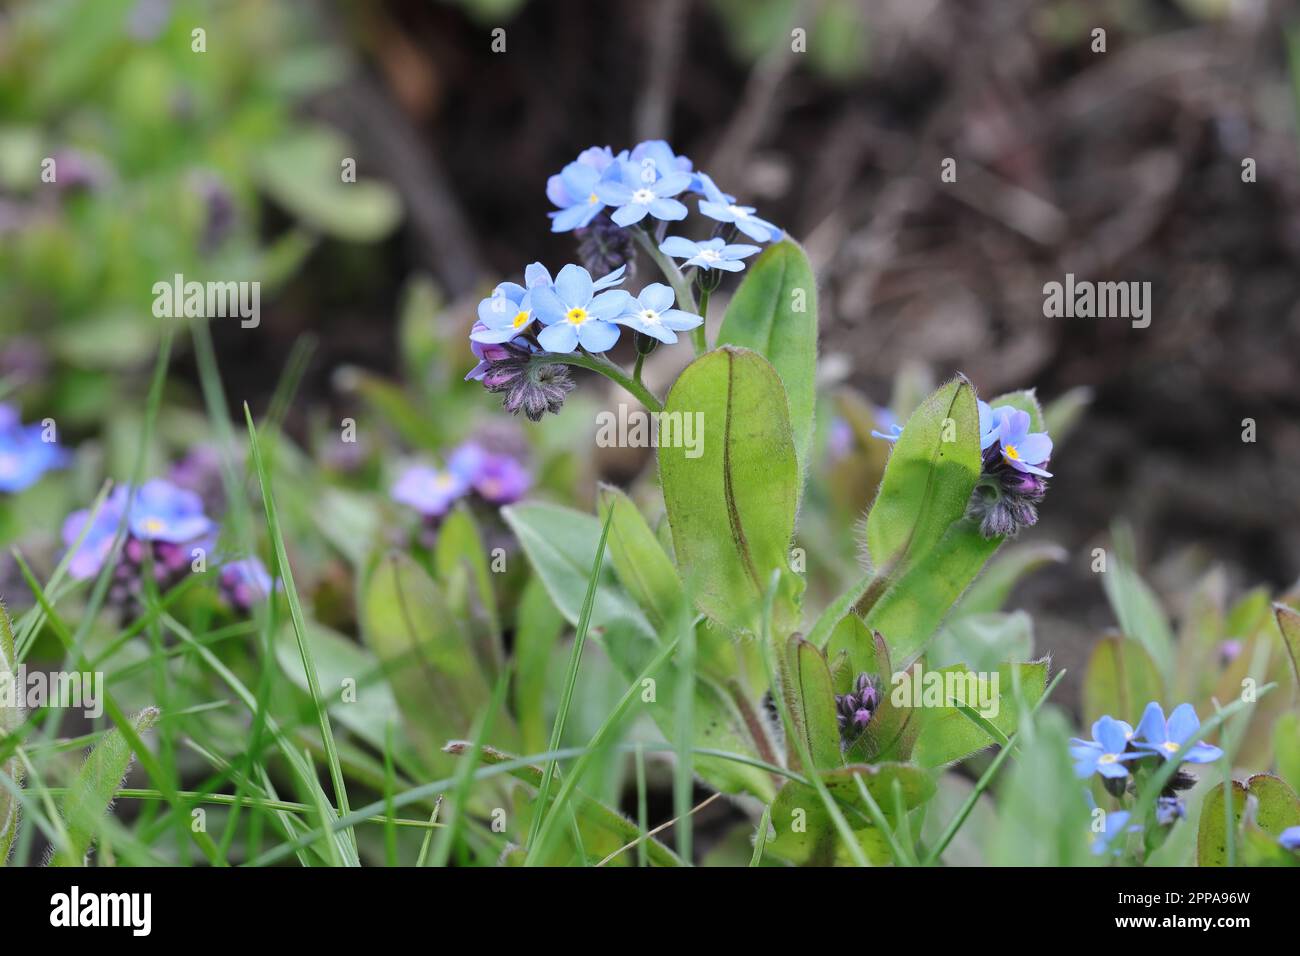 Close-up of pretty blue myosotis flowers in a garden, side view Stock Photo